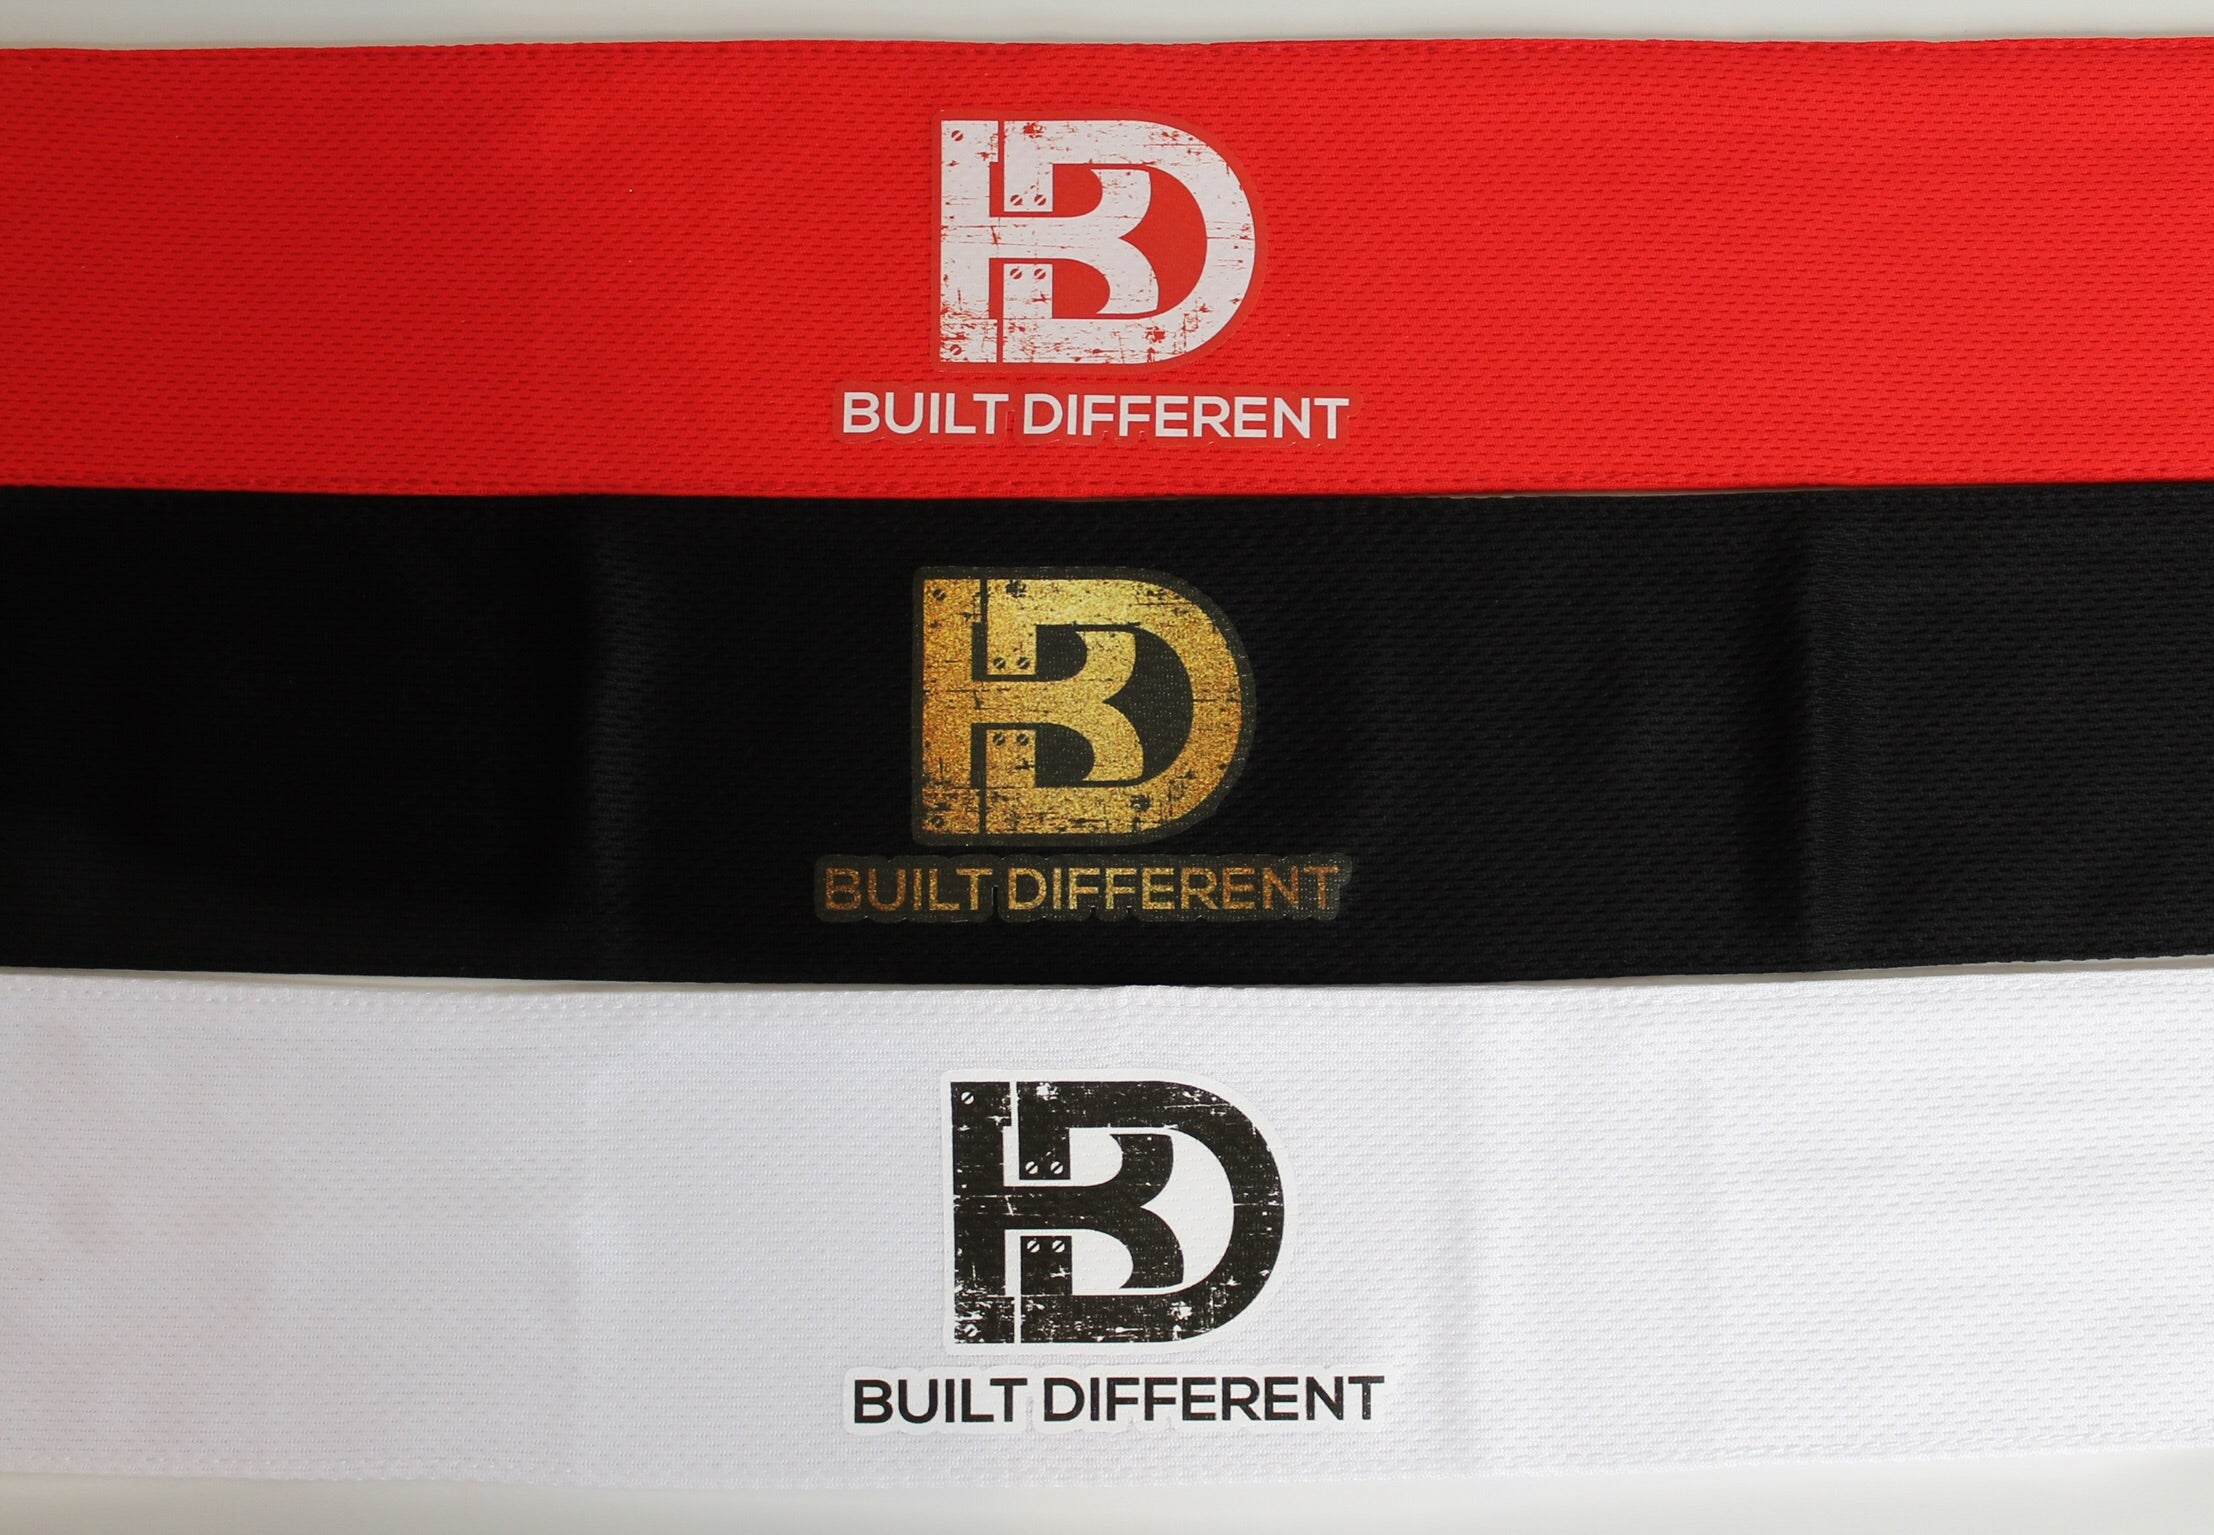 Buy All 3 Tie Headbands and save $5